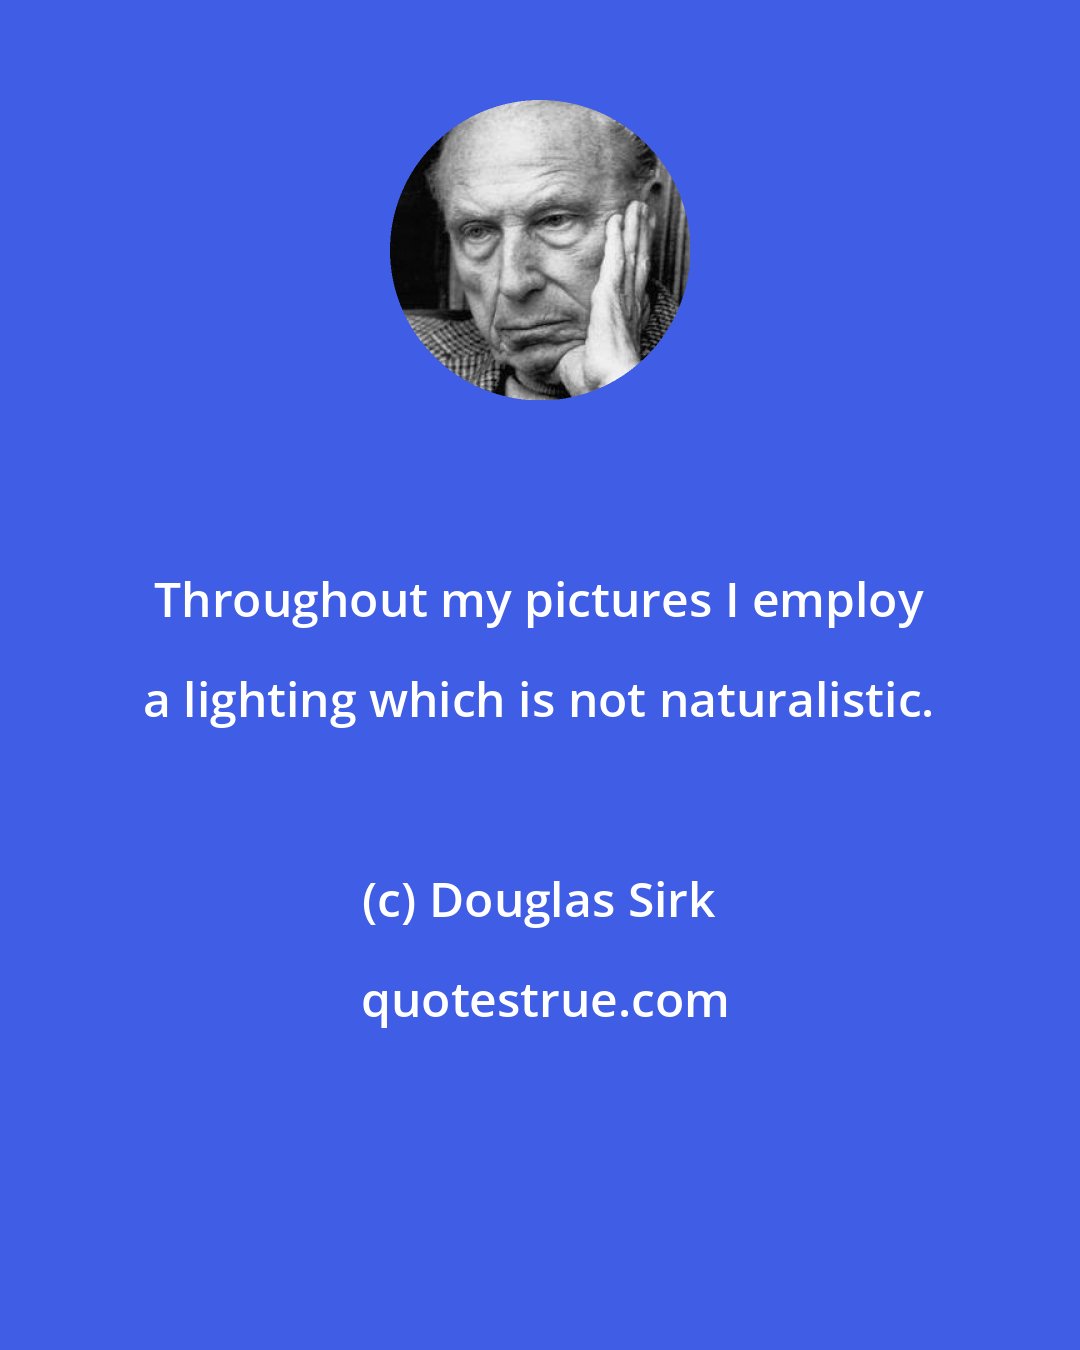 Douglas Sirk: Throughout my pictures I employ a lighting which is not naturalistic.